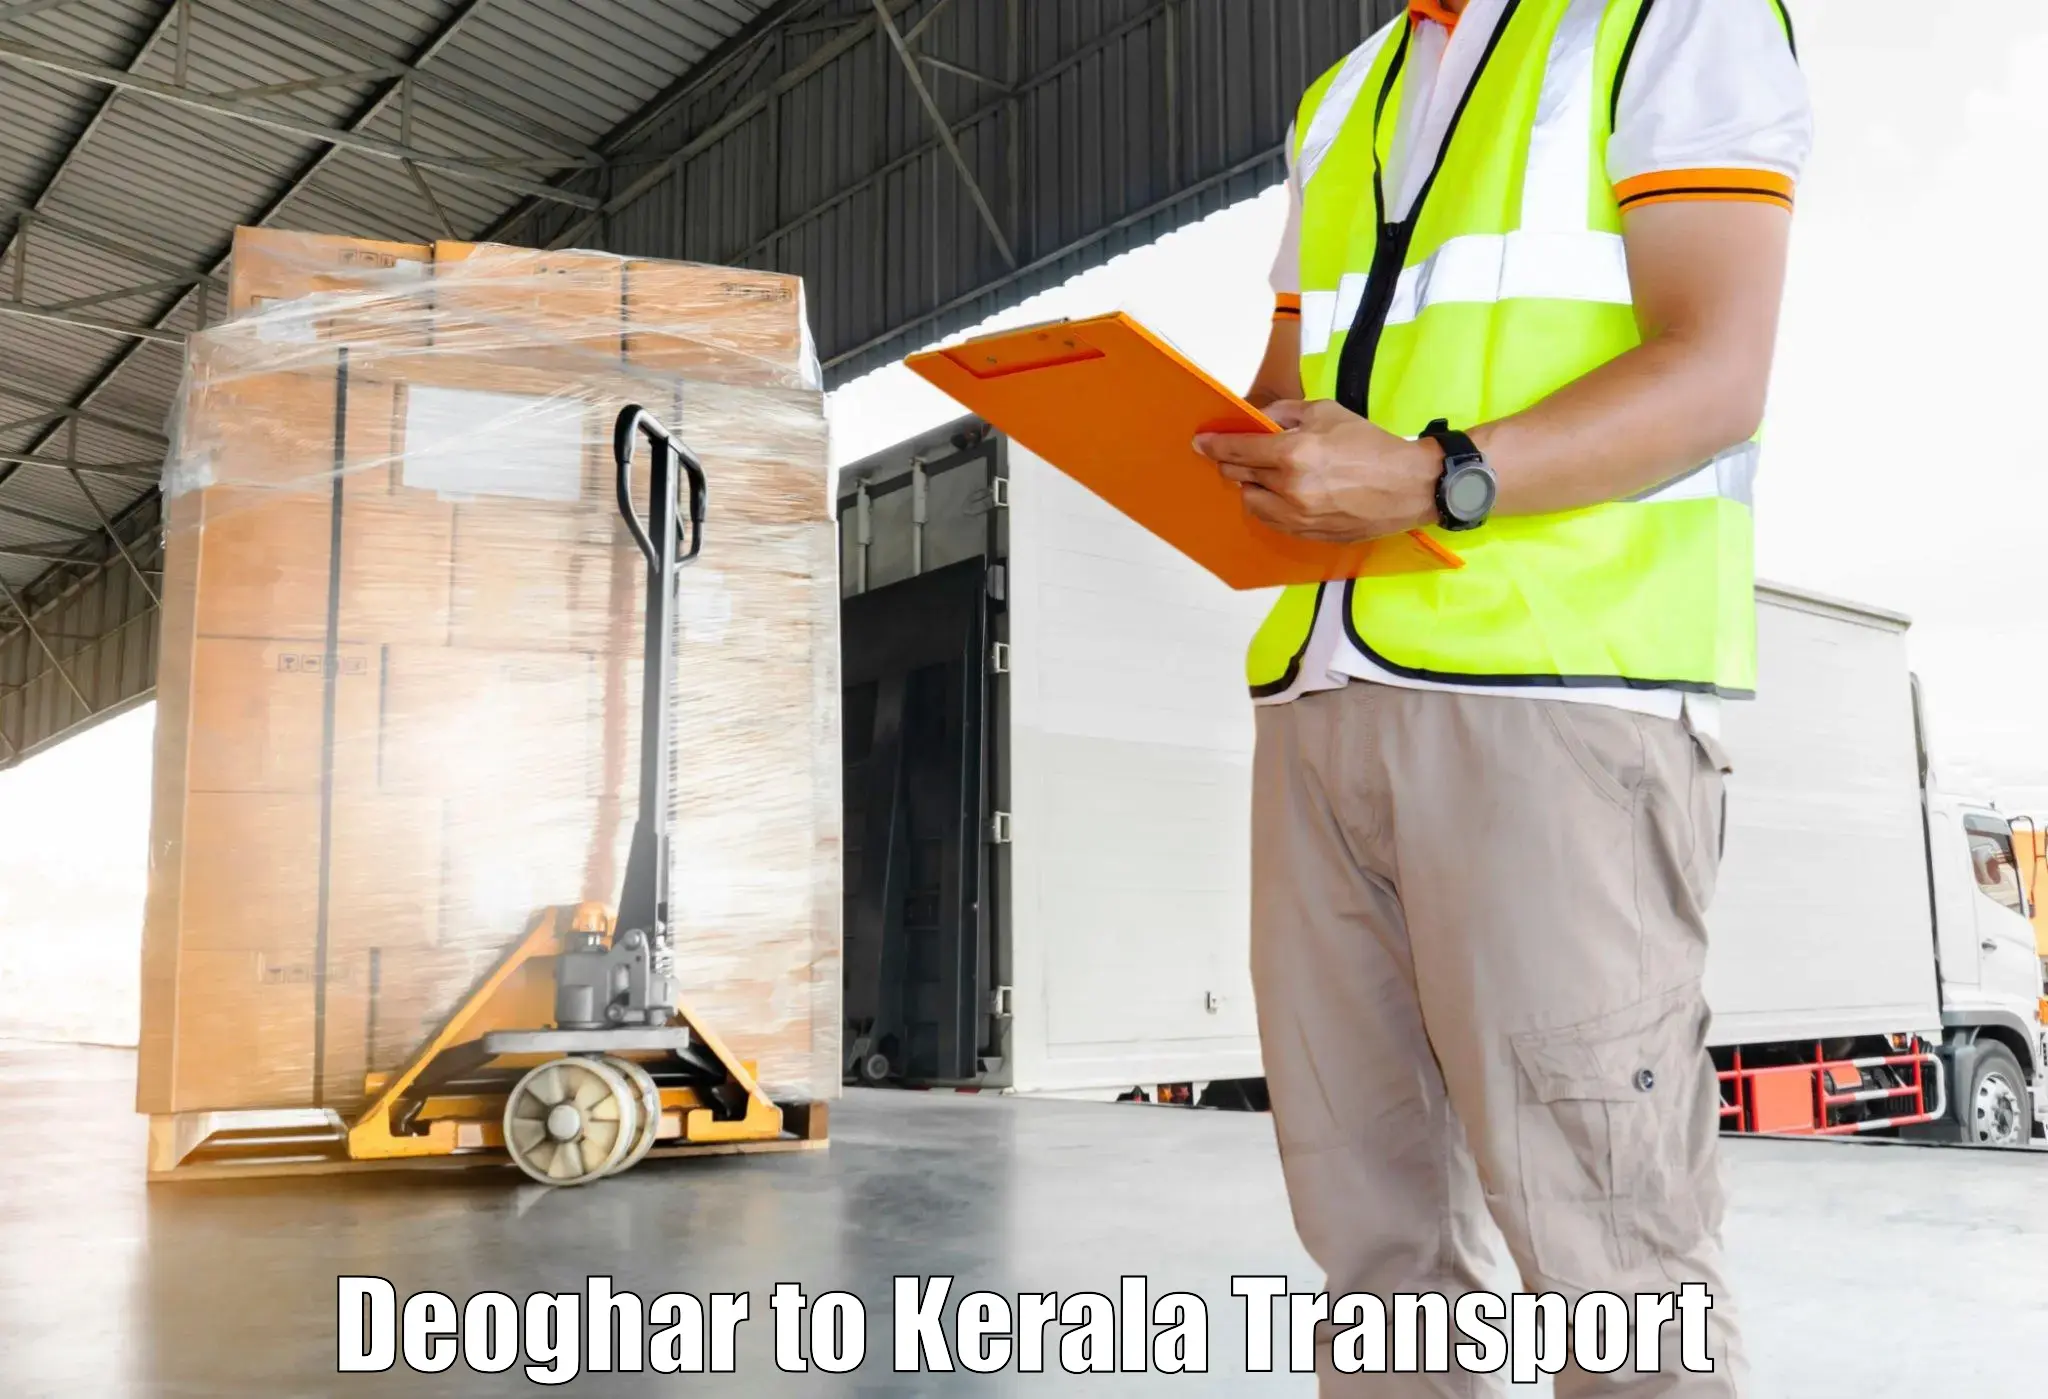 Delivery service Deoghar to Kozhikode